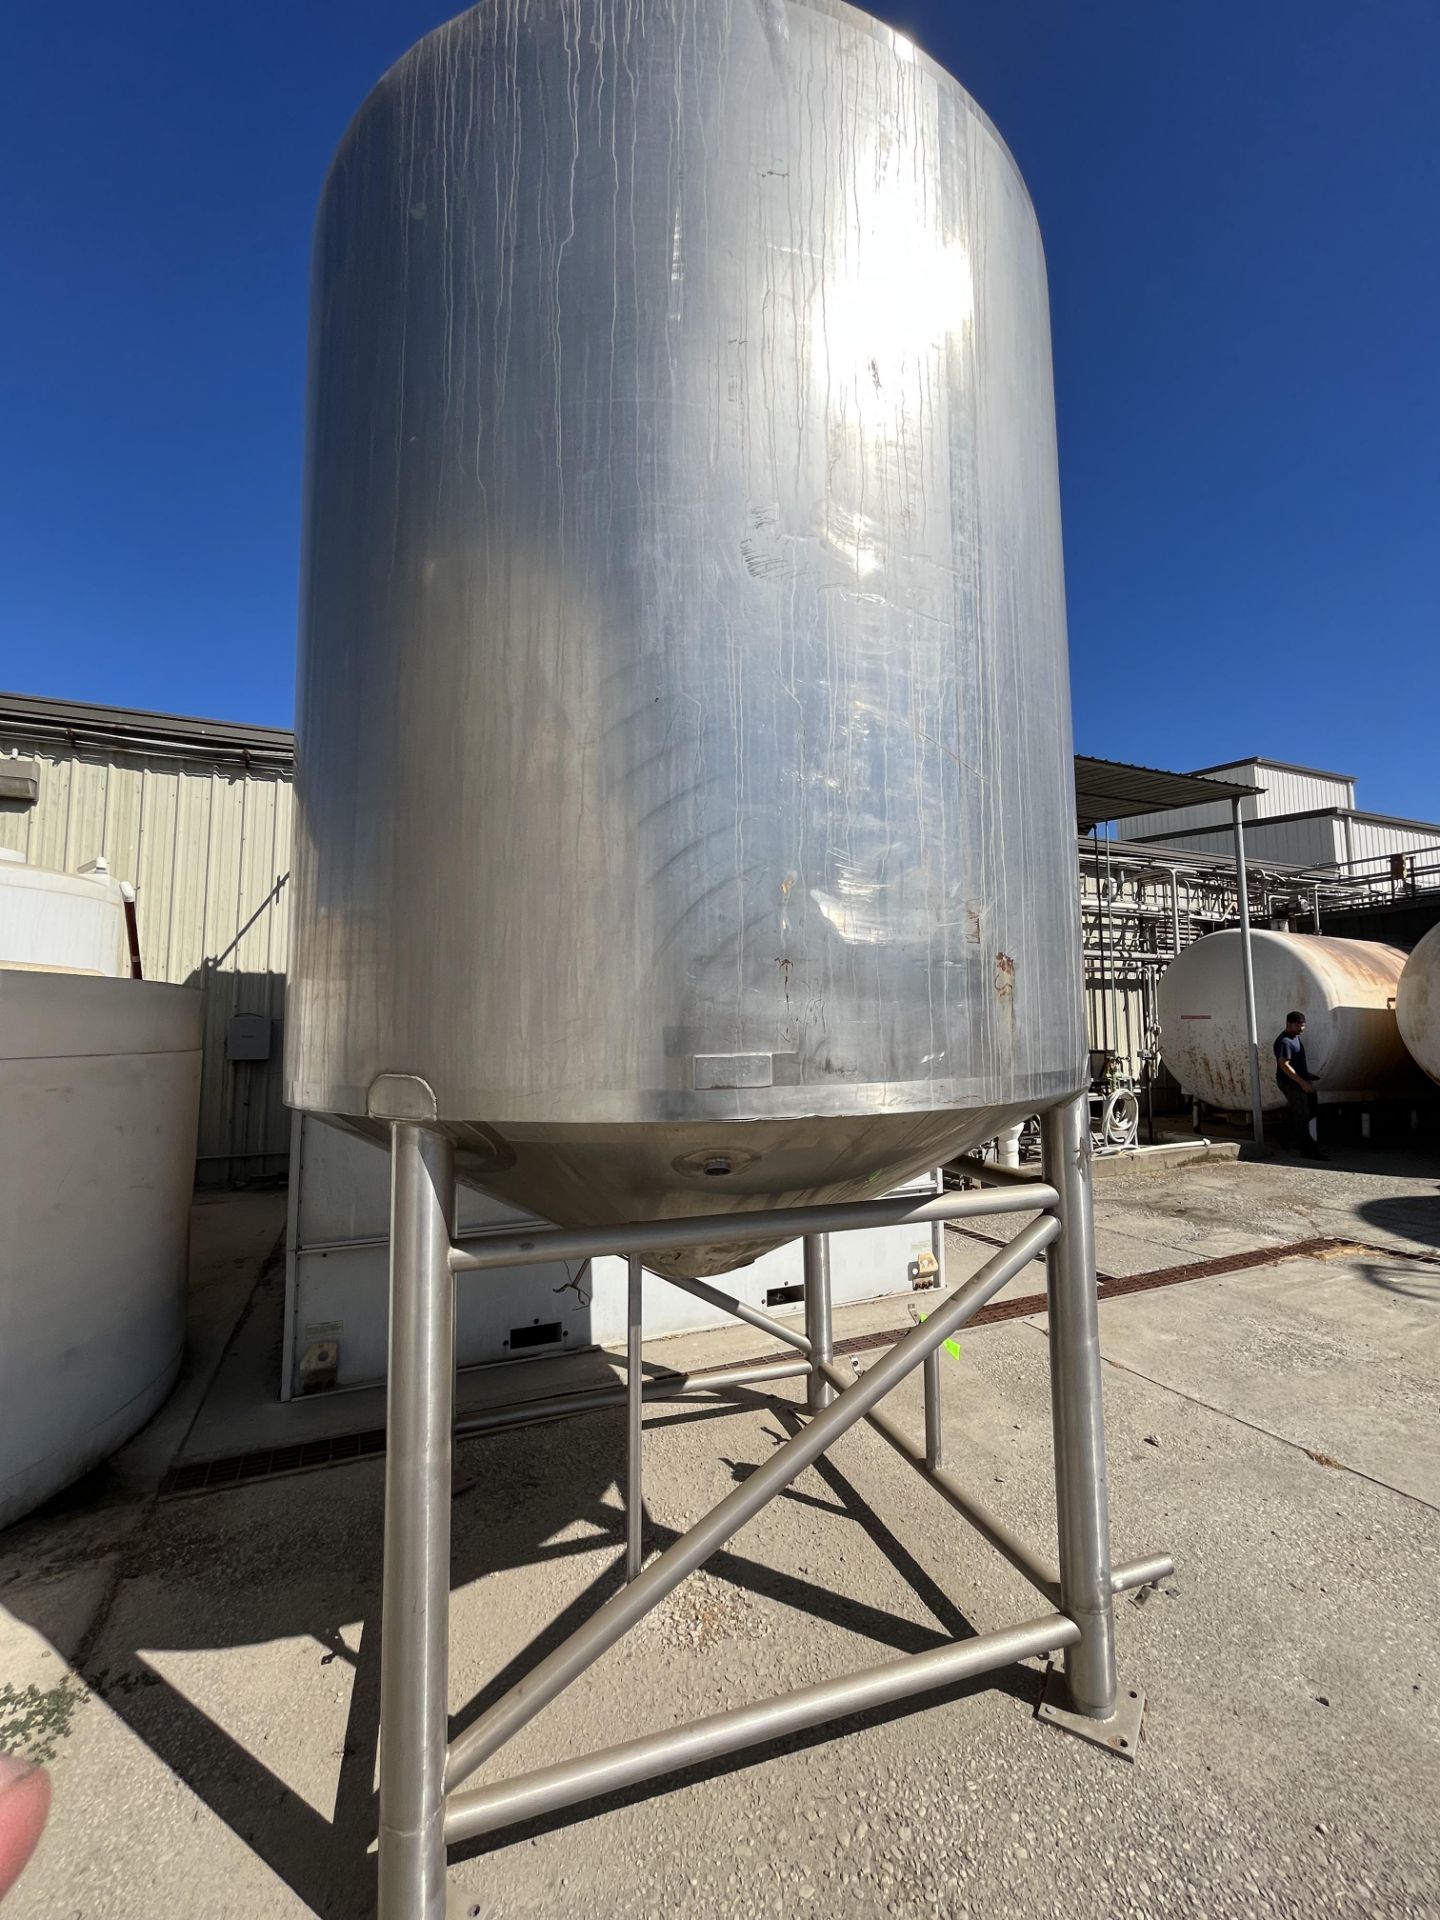 Sani-Fab Jacketed S/S Tank, Tank Dims.: Aprox. 7 ft. Tall x 80” Dia., Cone Bottom, Mounted on S/S - Image 2 of 9